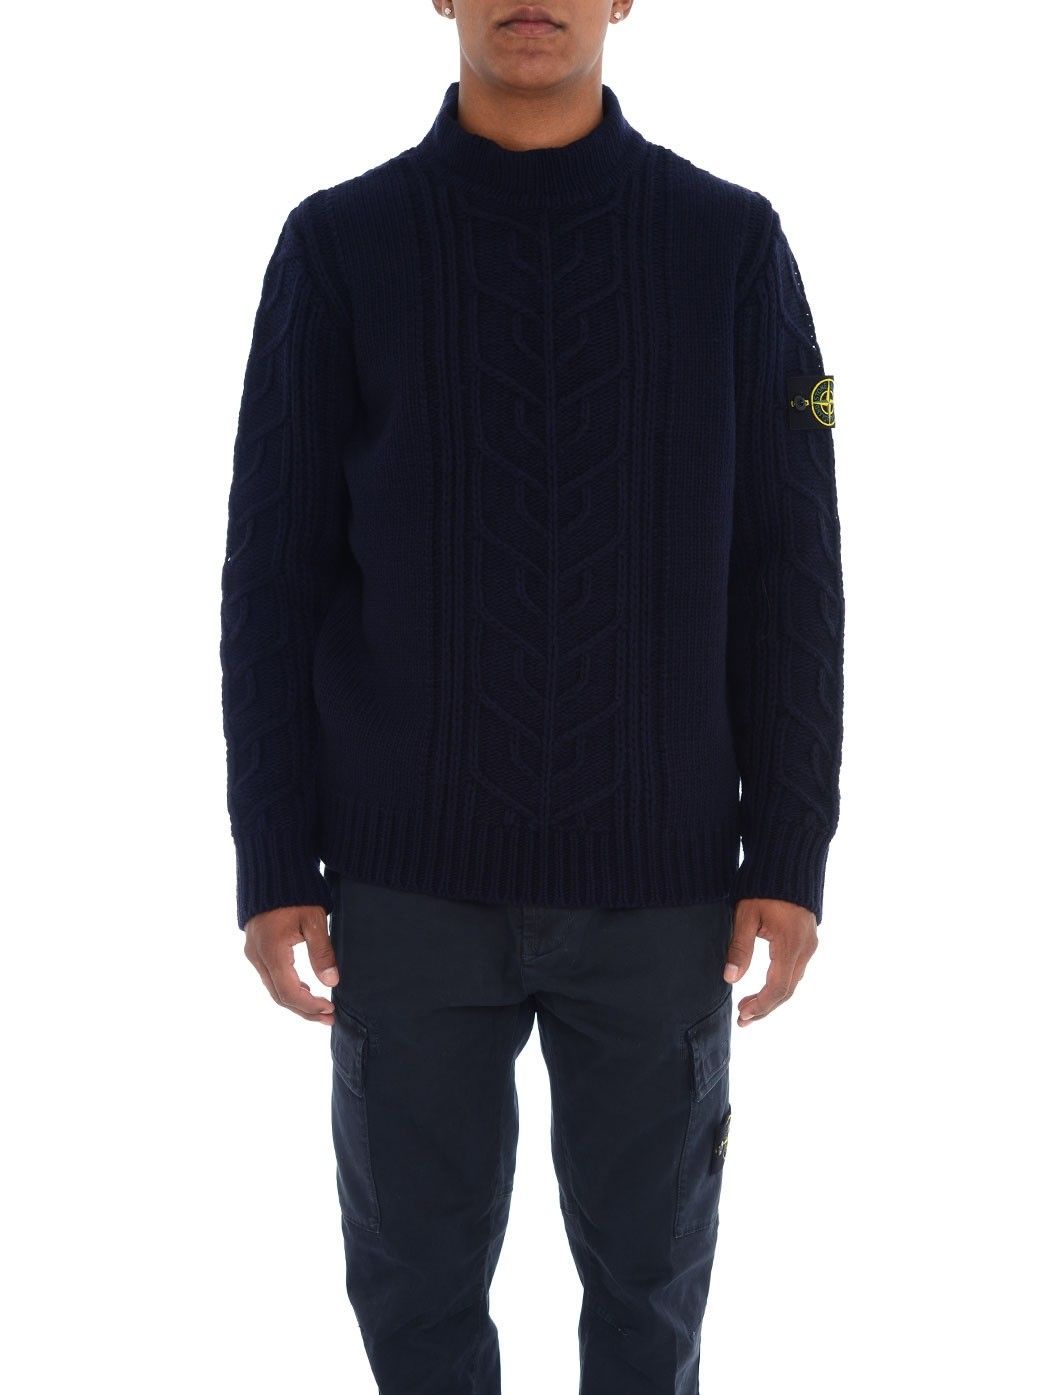  OUTLET,FALL WINTER COLLECTION,MENSWEAR,WOMENSWEAR,FALL WINTER SALES,FALL WINTER DISCOUNT  STONE ISLAND 7515569D4